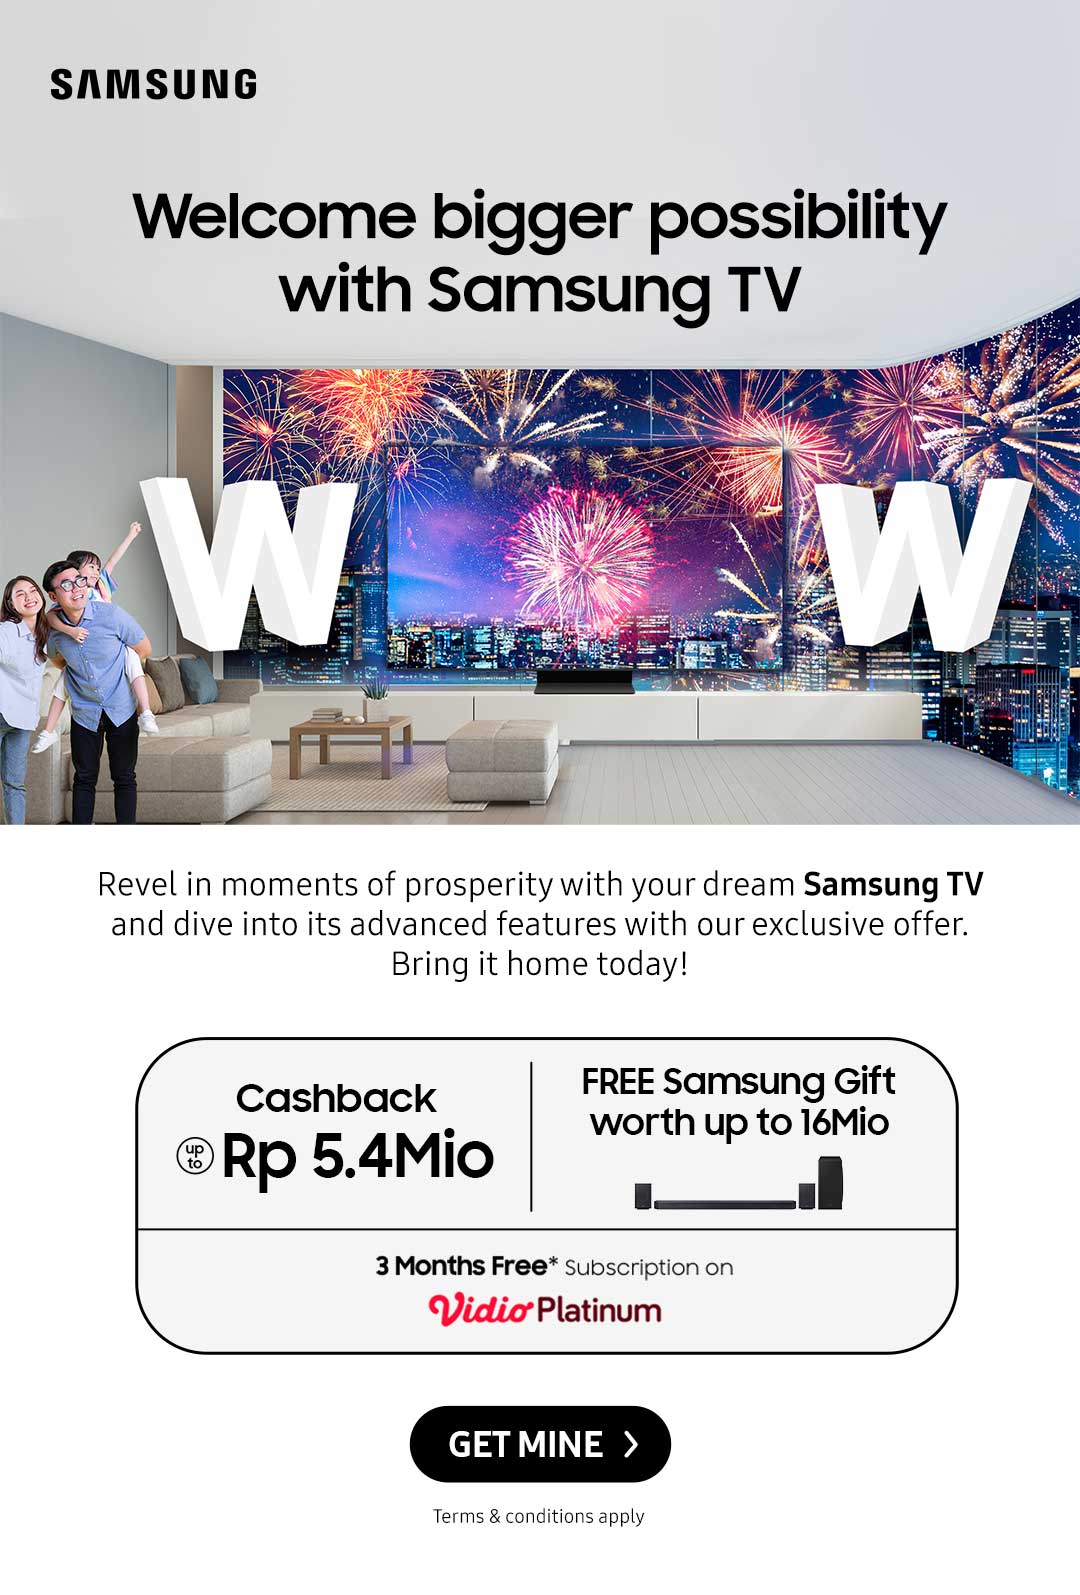 Welcome bigger possibility with Samsung TV | Revel in moments of prosperity with your dream Samsung TV and dive into its advanced features with our exclusive offer. Bring it home today!